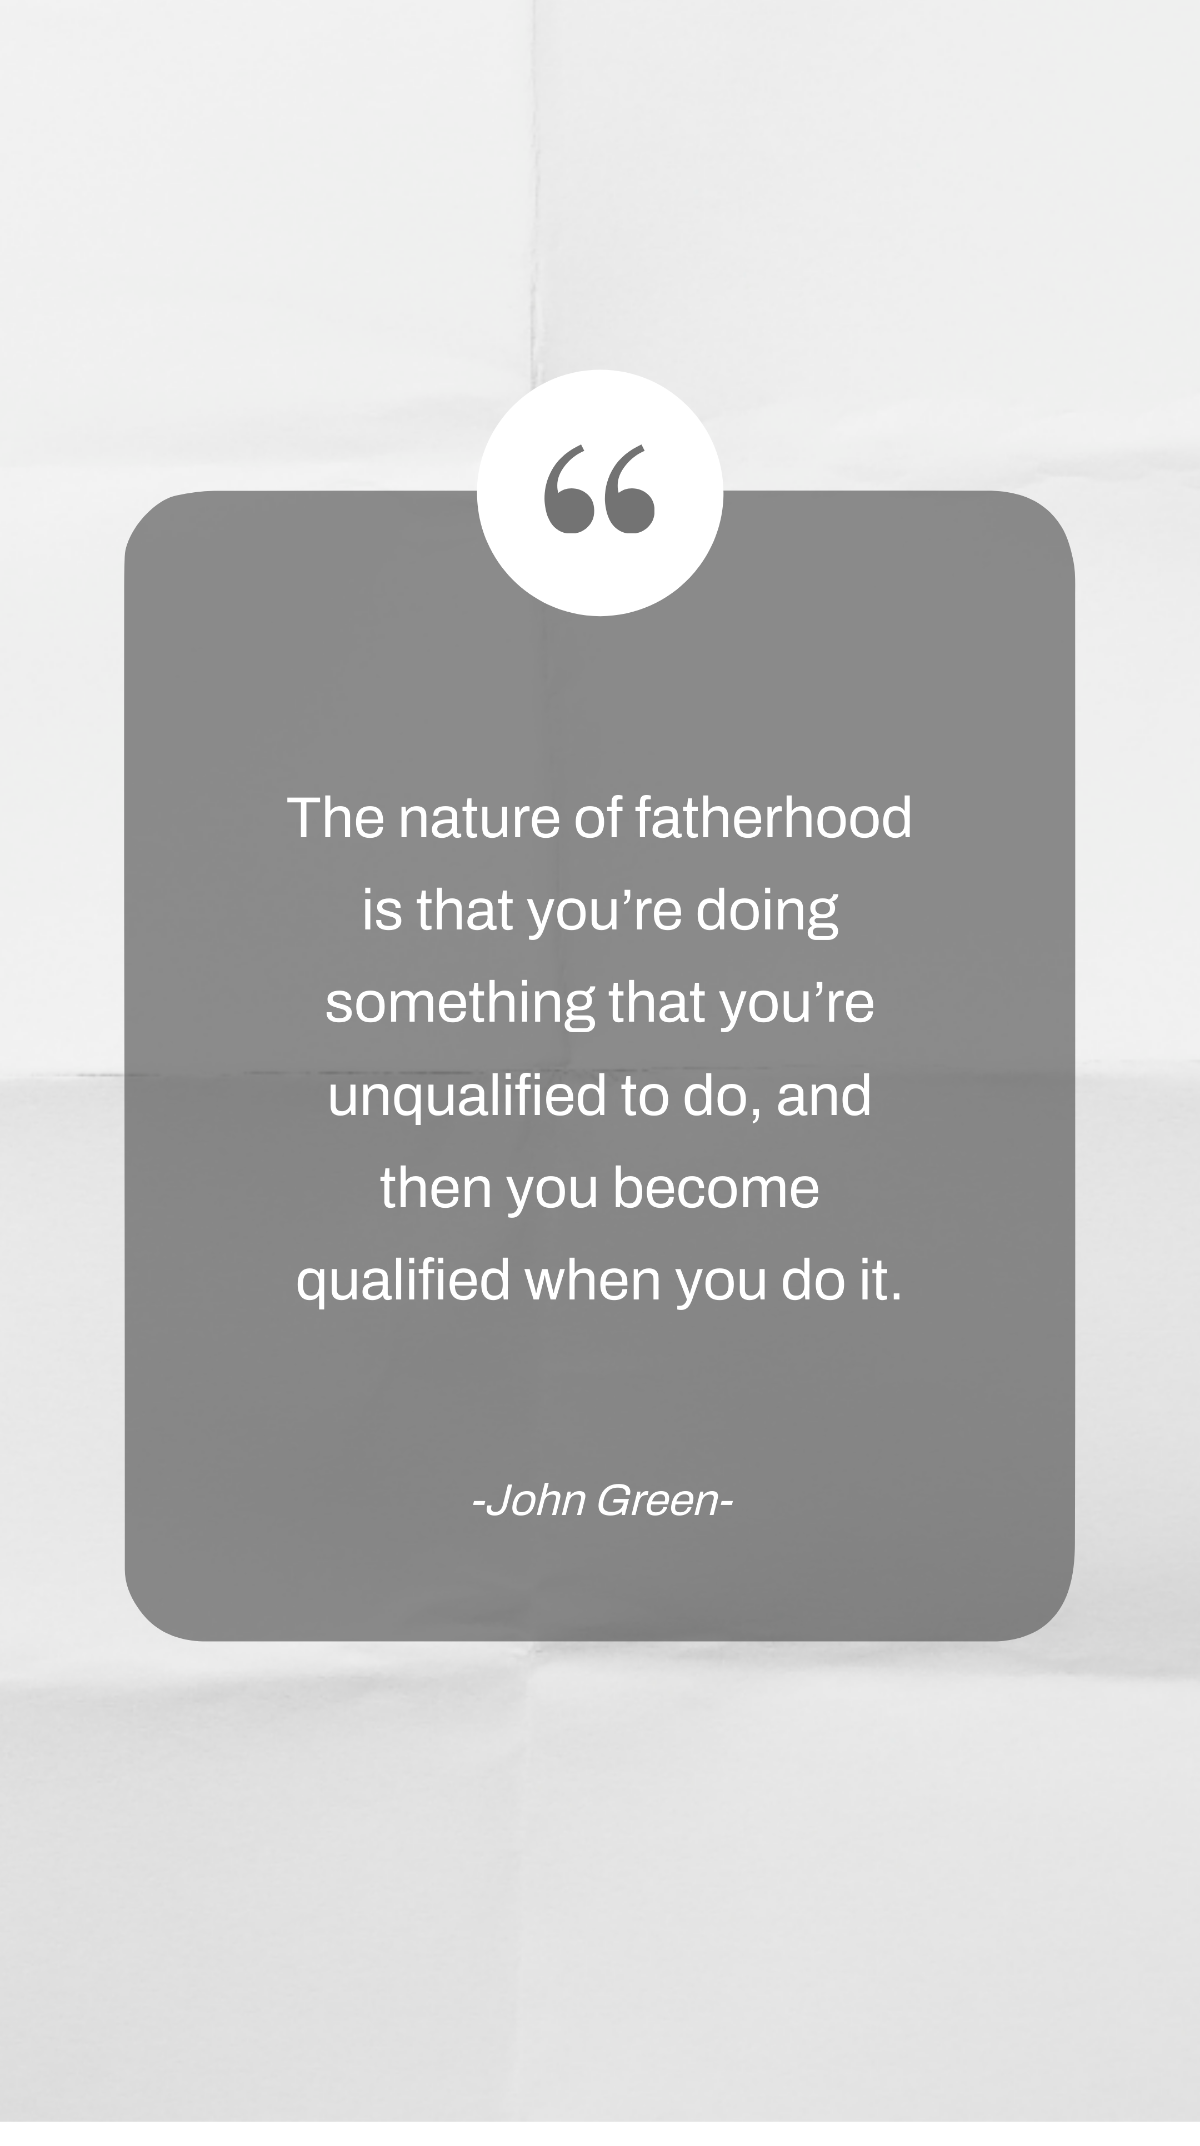 John Green - The nature of fatherhood is that you’re doing something that you’re unqualified to do, and then you become qualified when you do it. Template